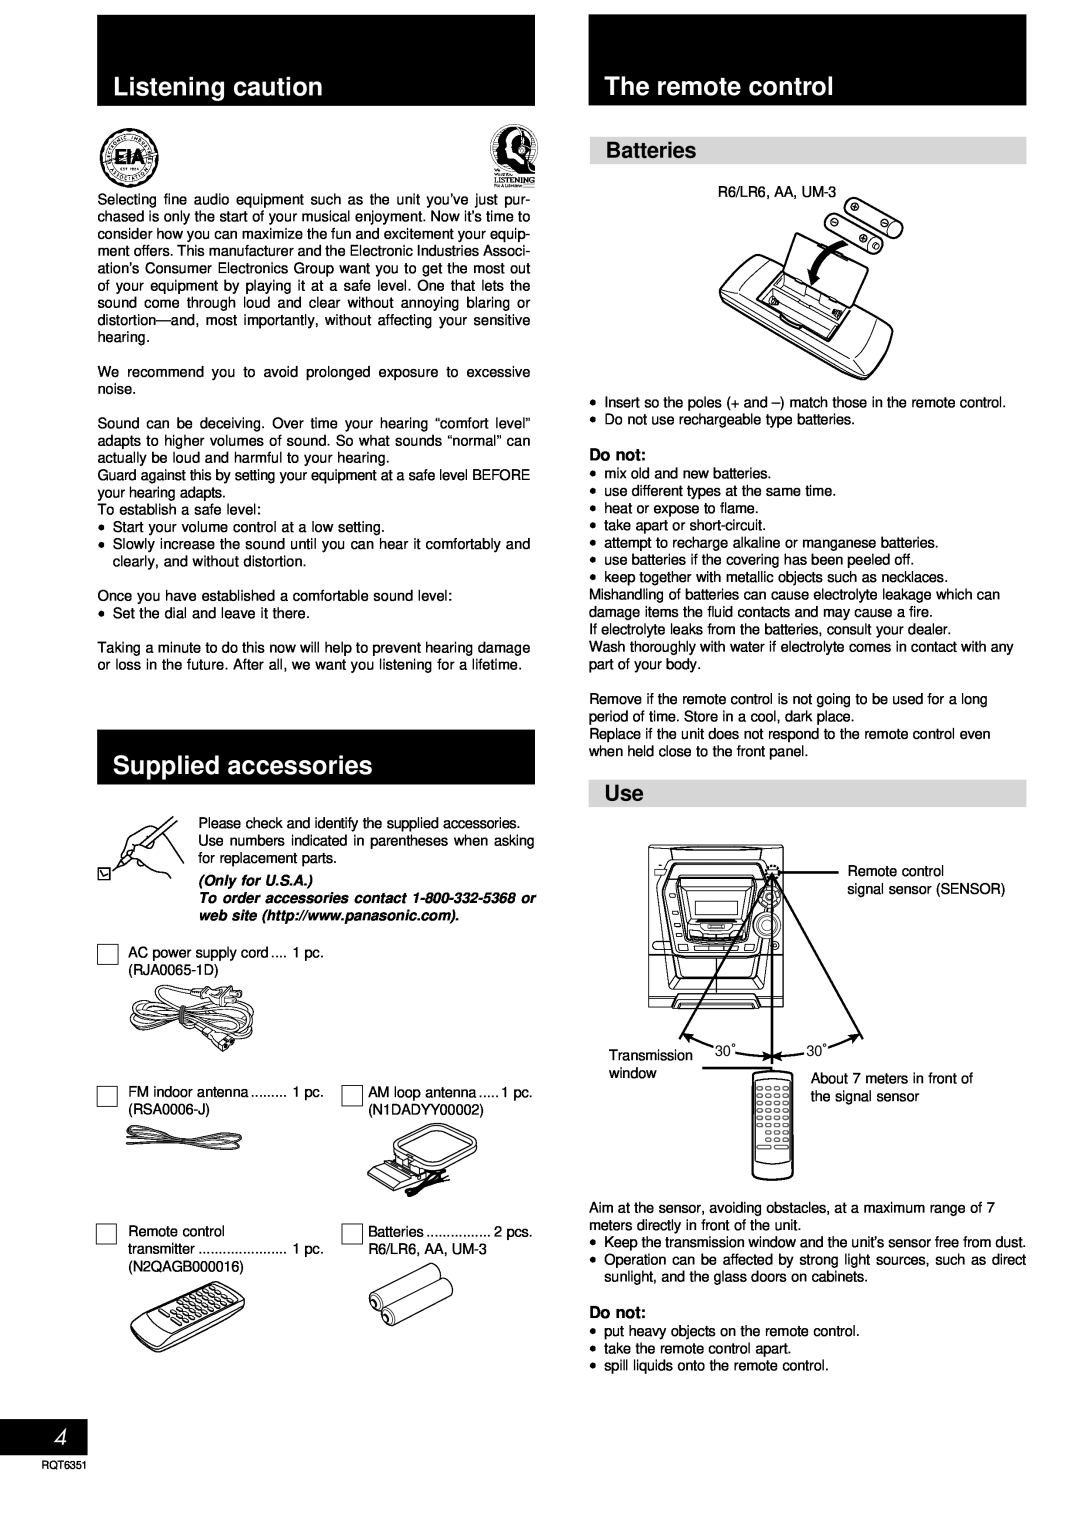 Panasonic SC-AK100 operating instructions Listening caution, The remote control, Supplied accessories, Batteries 